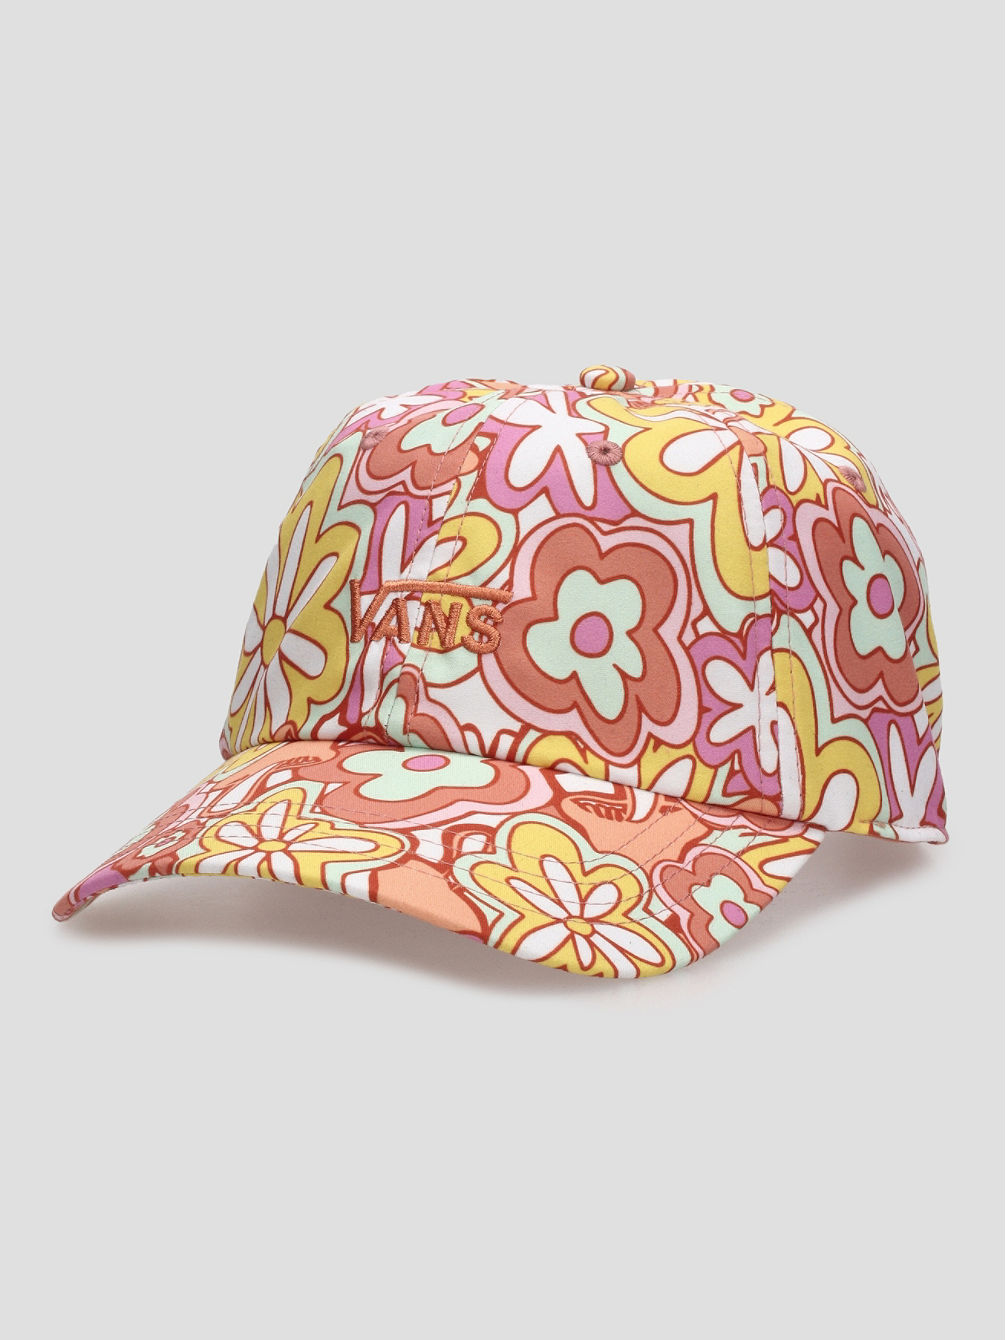 Court Side Printed Cap